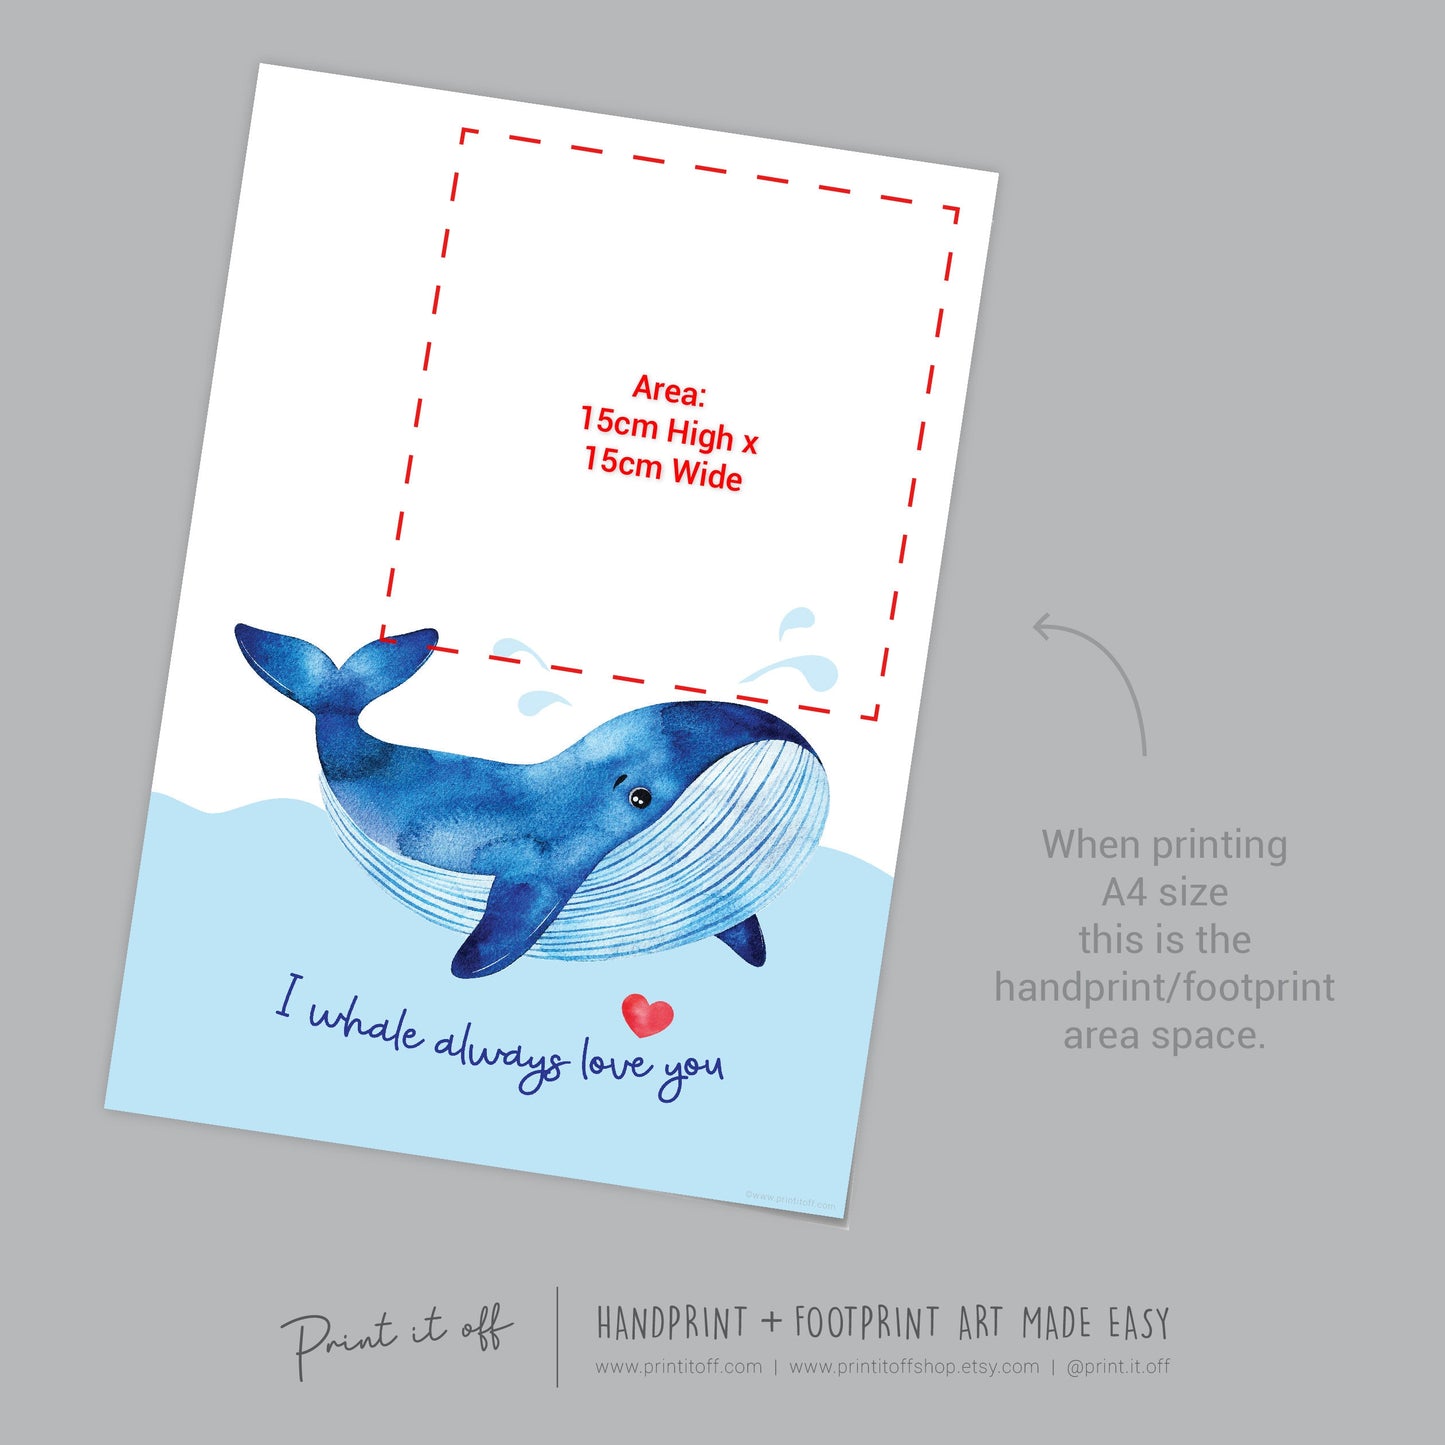 I whale always love you / Footprint Handprint Art Craft / Mother&#39;s Father&#39;s Day / Kids Baby Toddler / Keepsake Gift Card